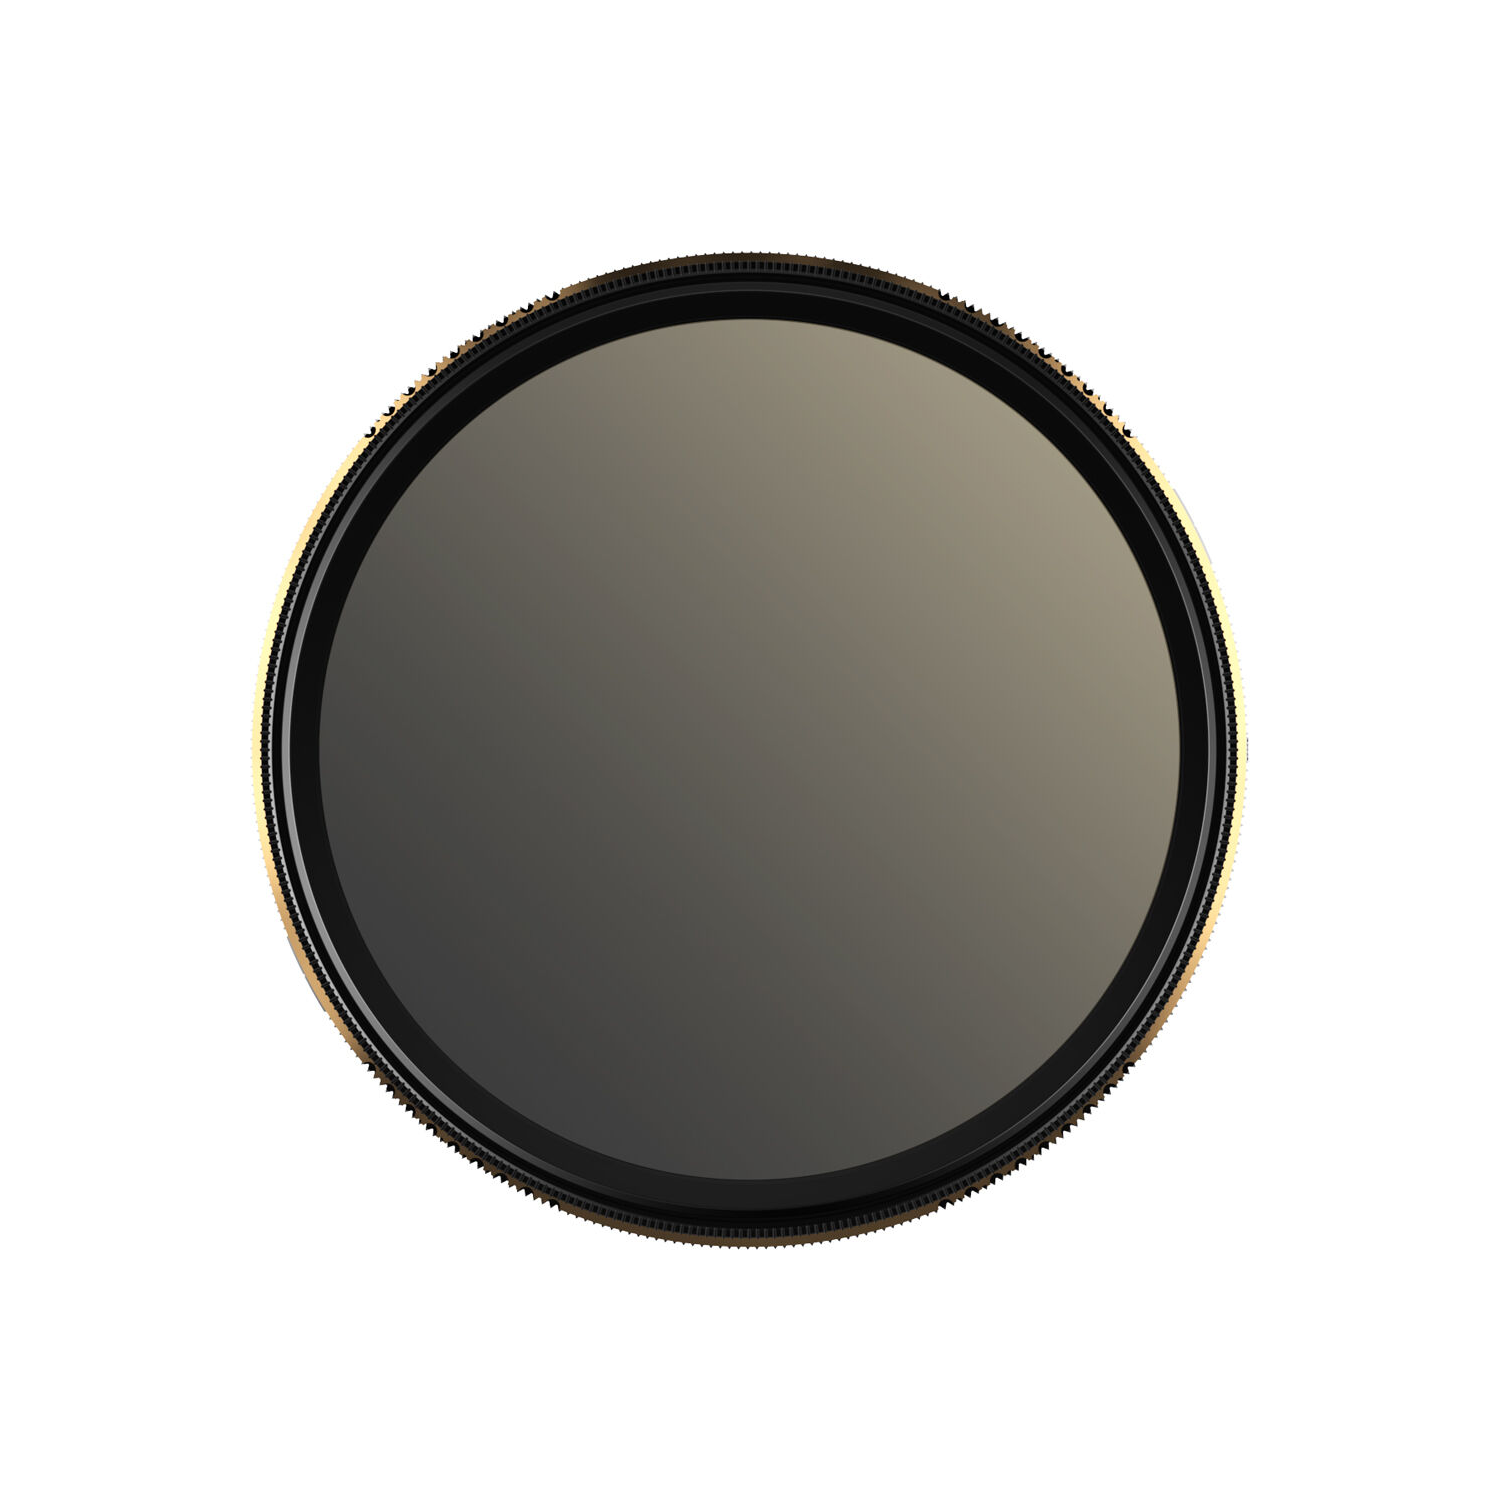 PolarPro Peter McKinnon Signature Edition II Variable ND 0.6 to 1.5 Filter - 2 to 5-Stop - 77mm